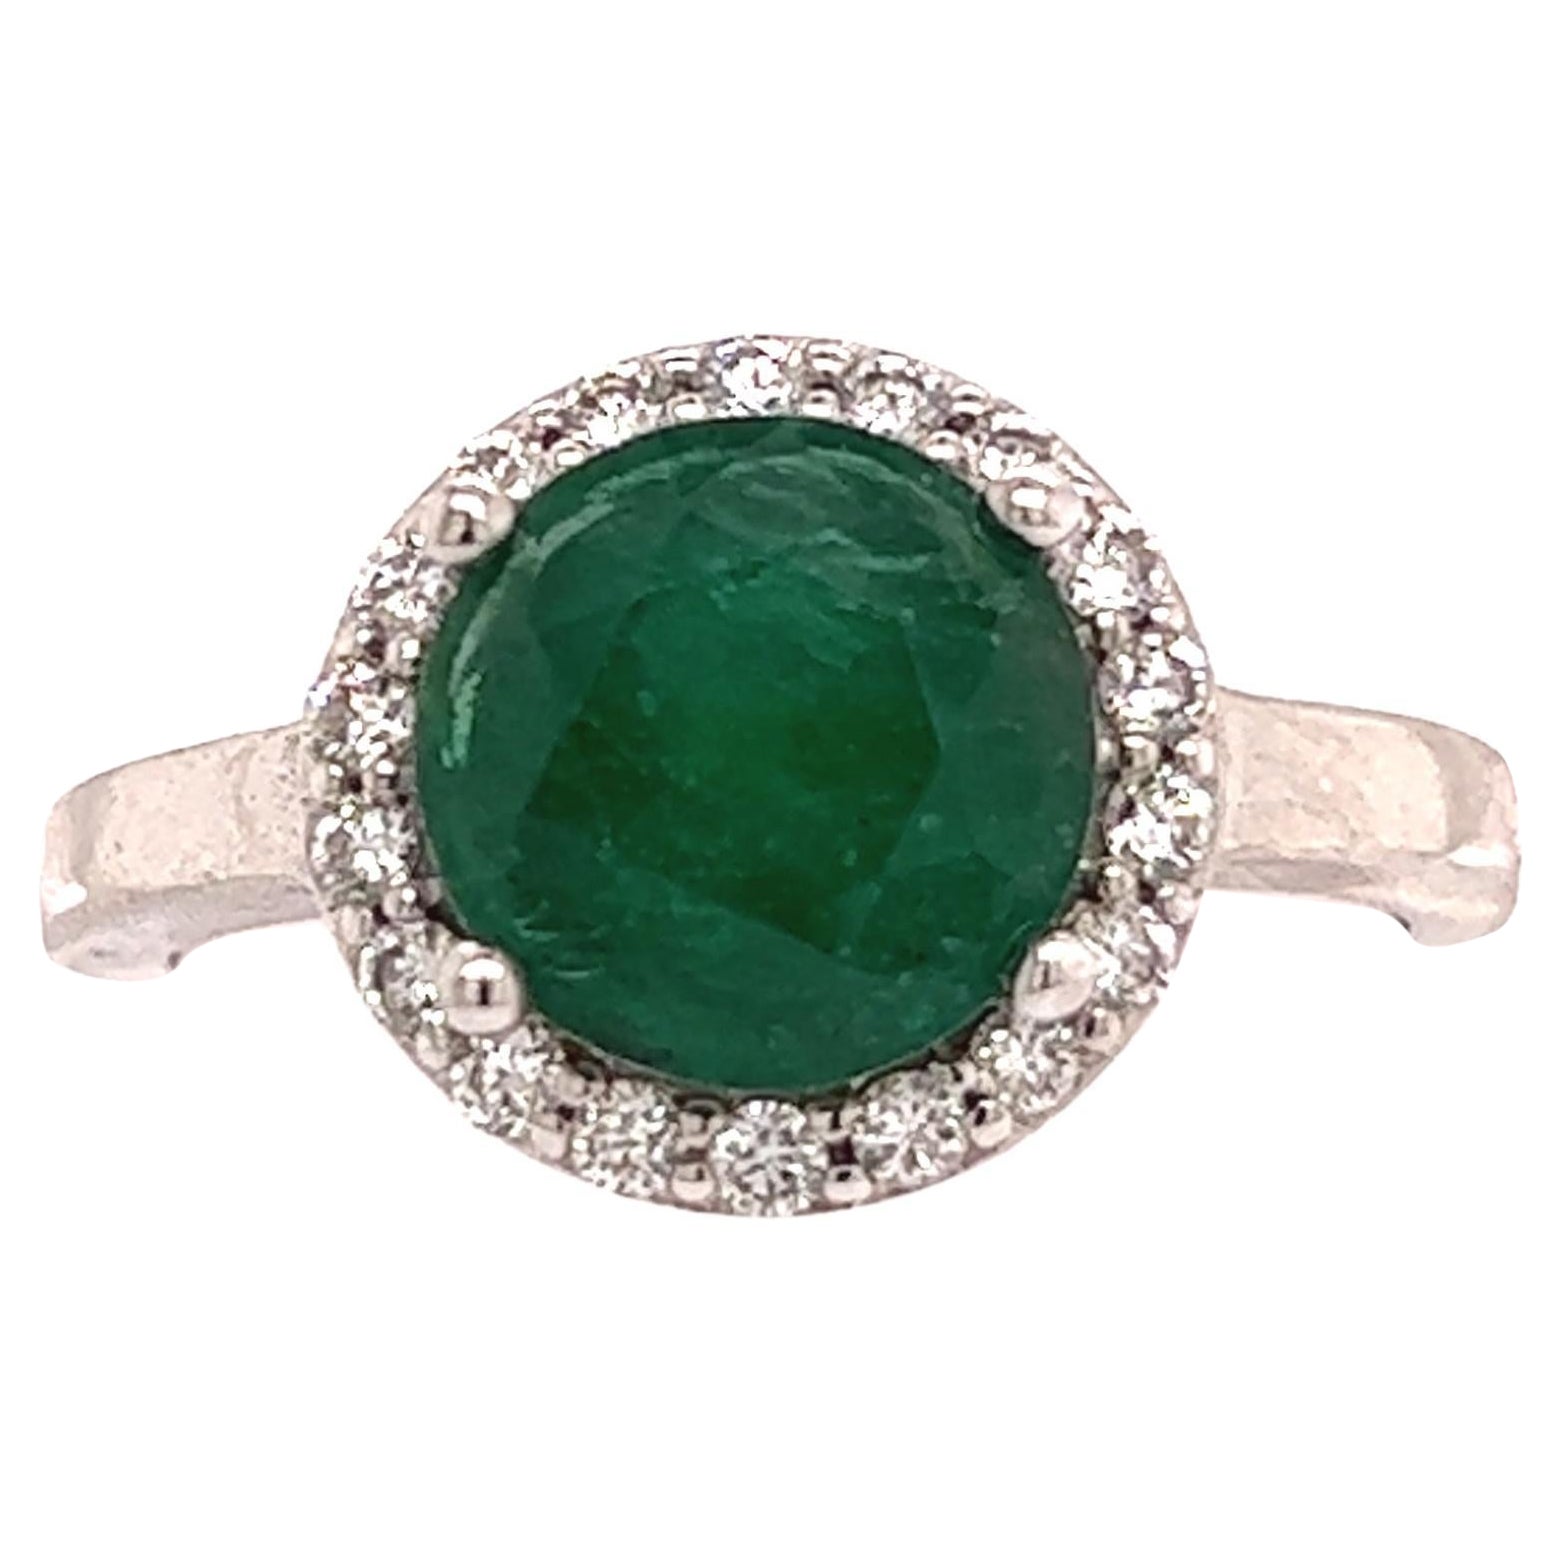 Natural Emerald Diamond Ring 14k Gold 2.83 TCW Certified For Sale